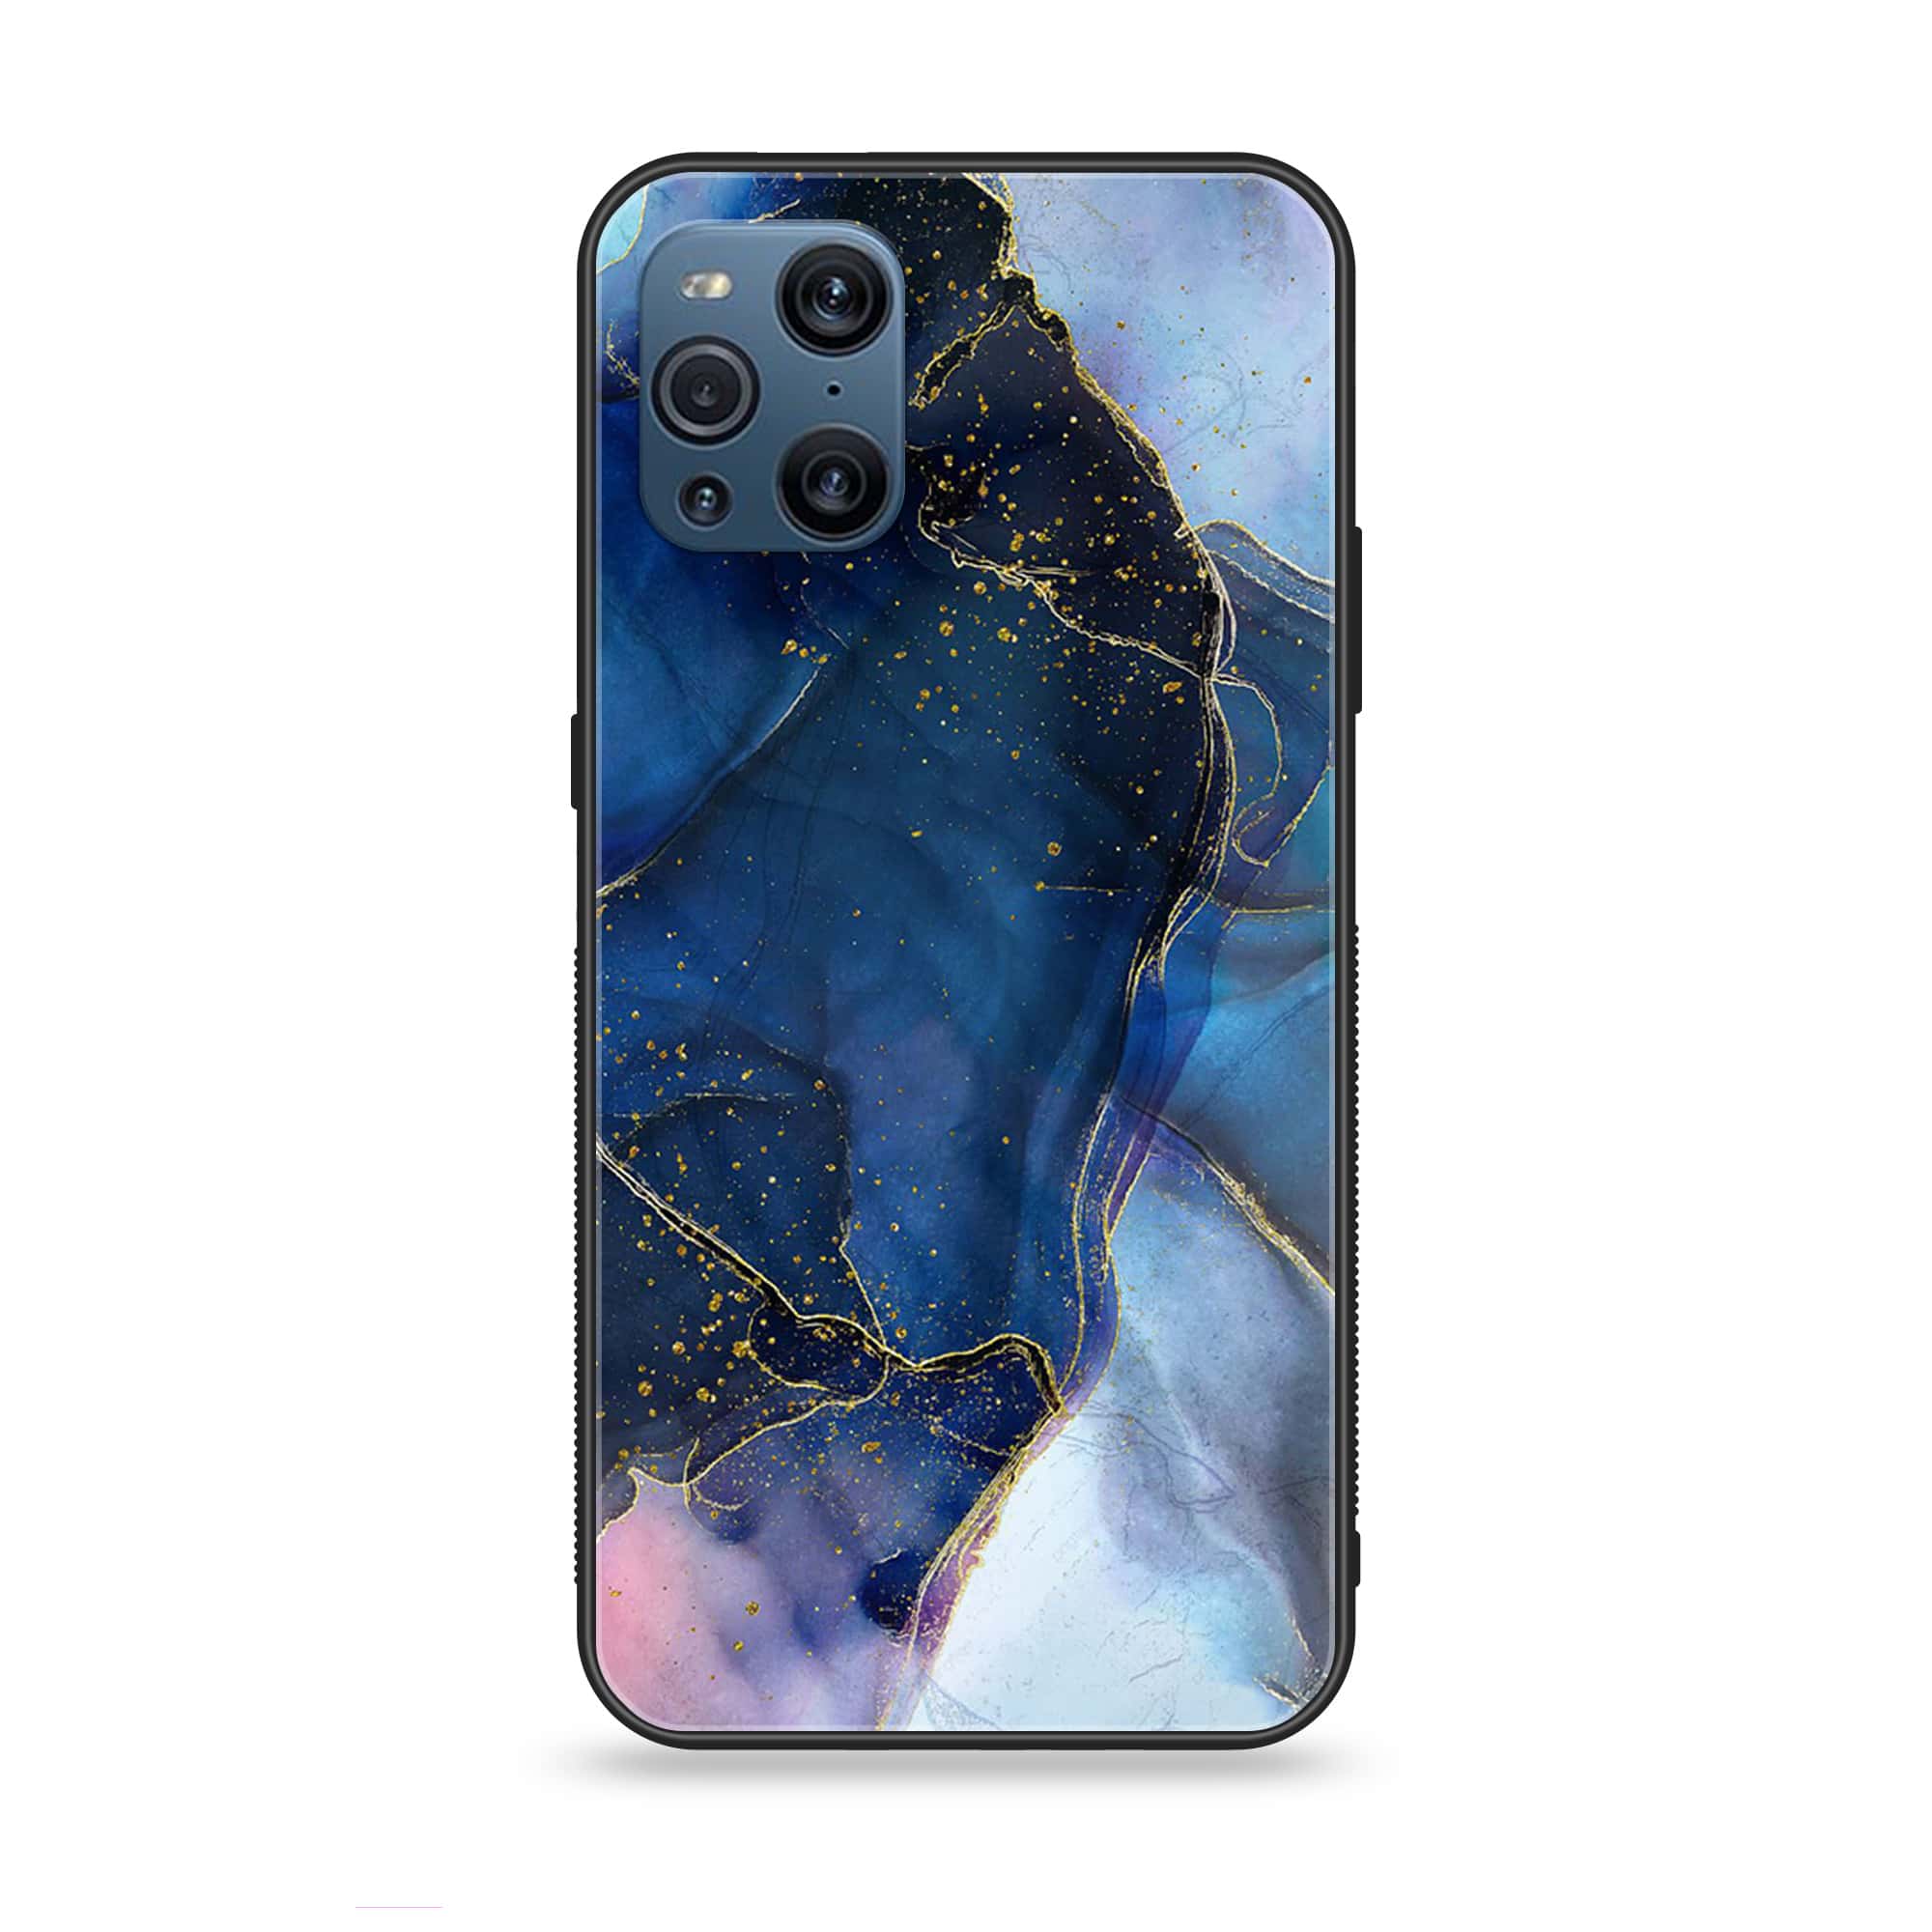 Oppo Find X3 - Blue Marble  Series - Premium Printed Glass soft Bumper shock Proof Case